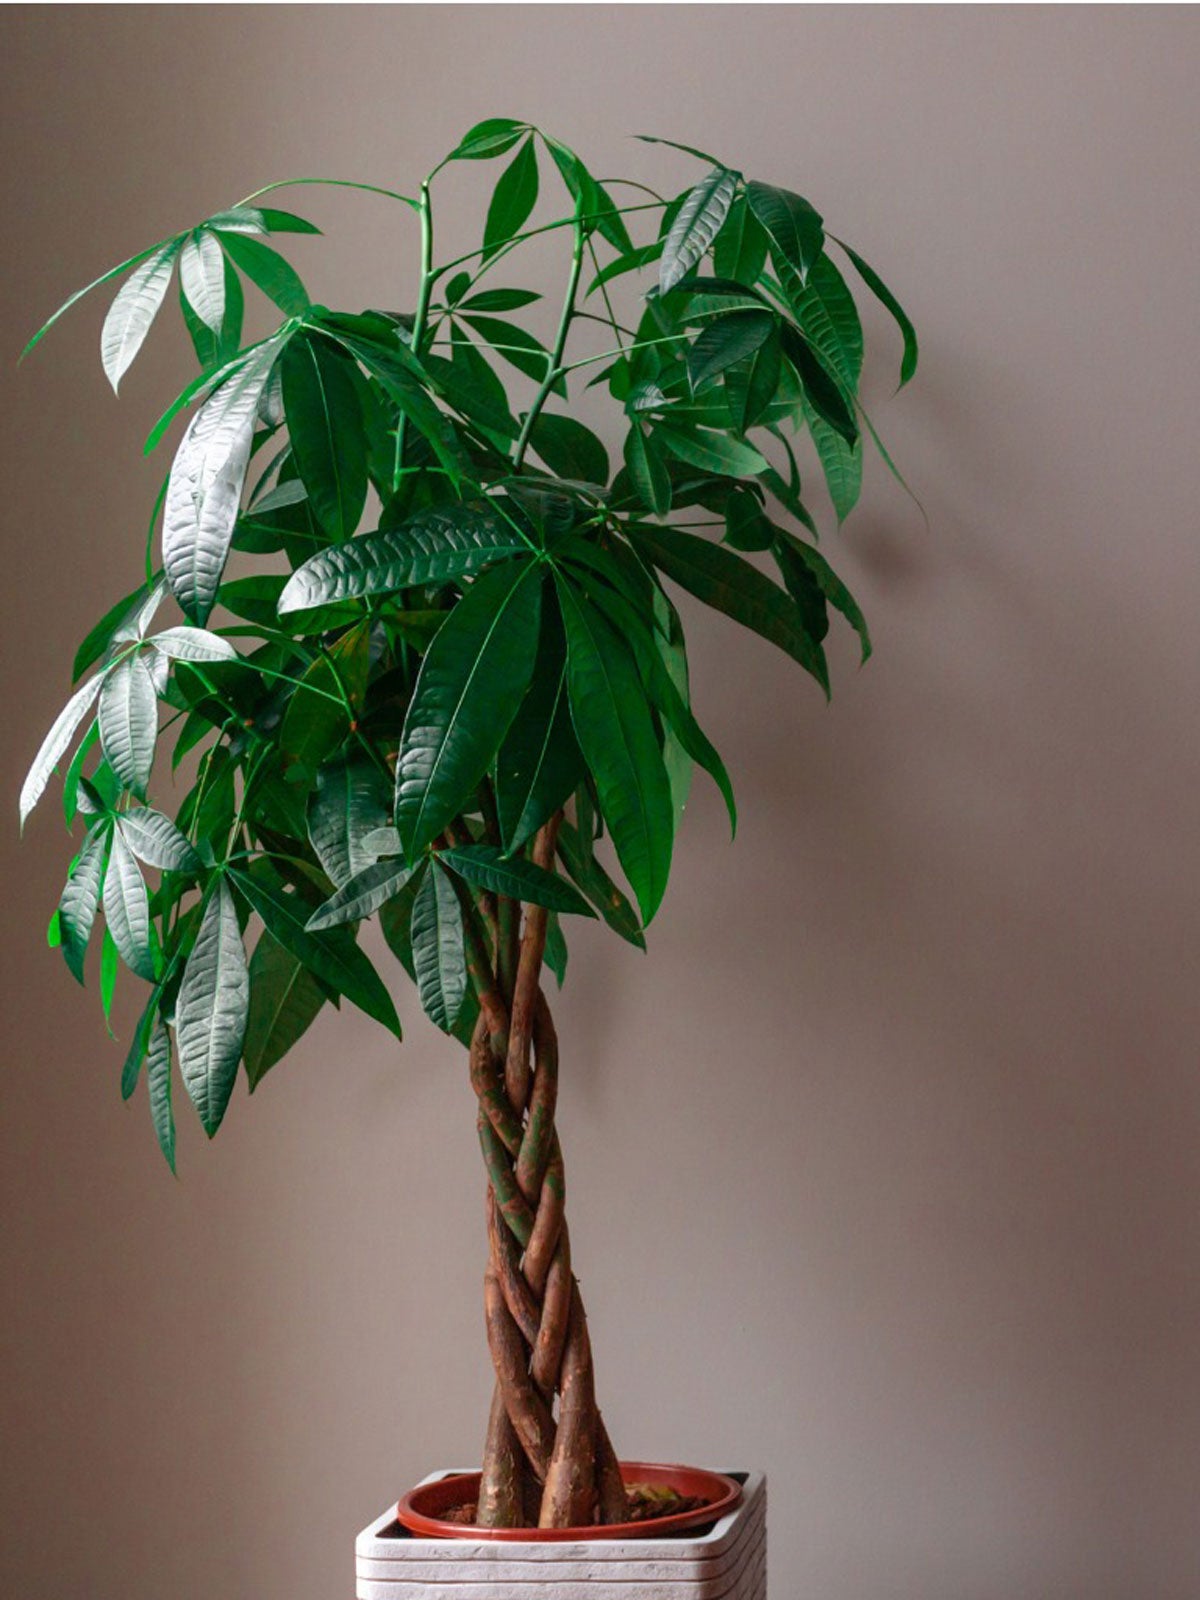 pachira money tree - learn how to care for money tree plants